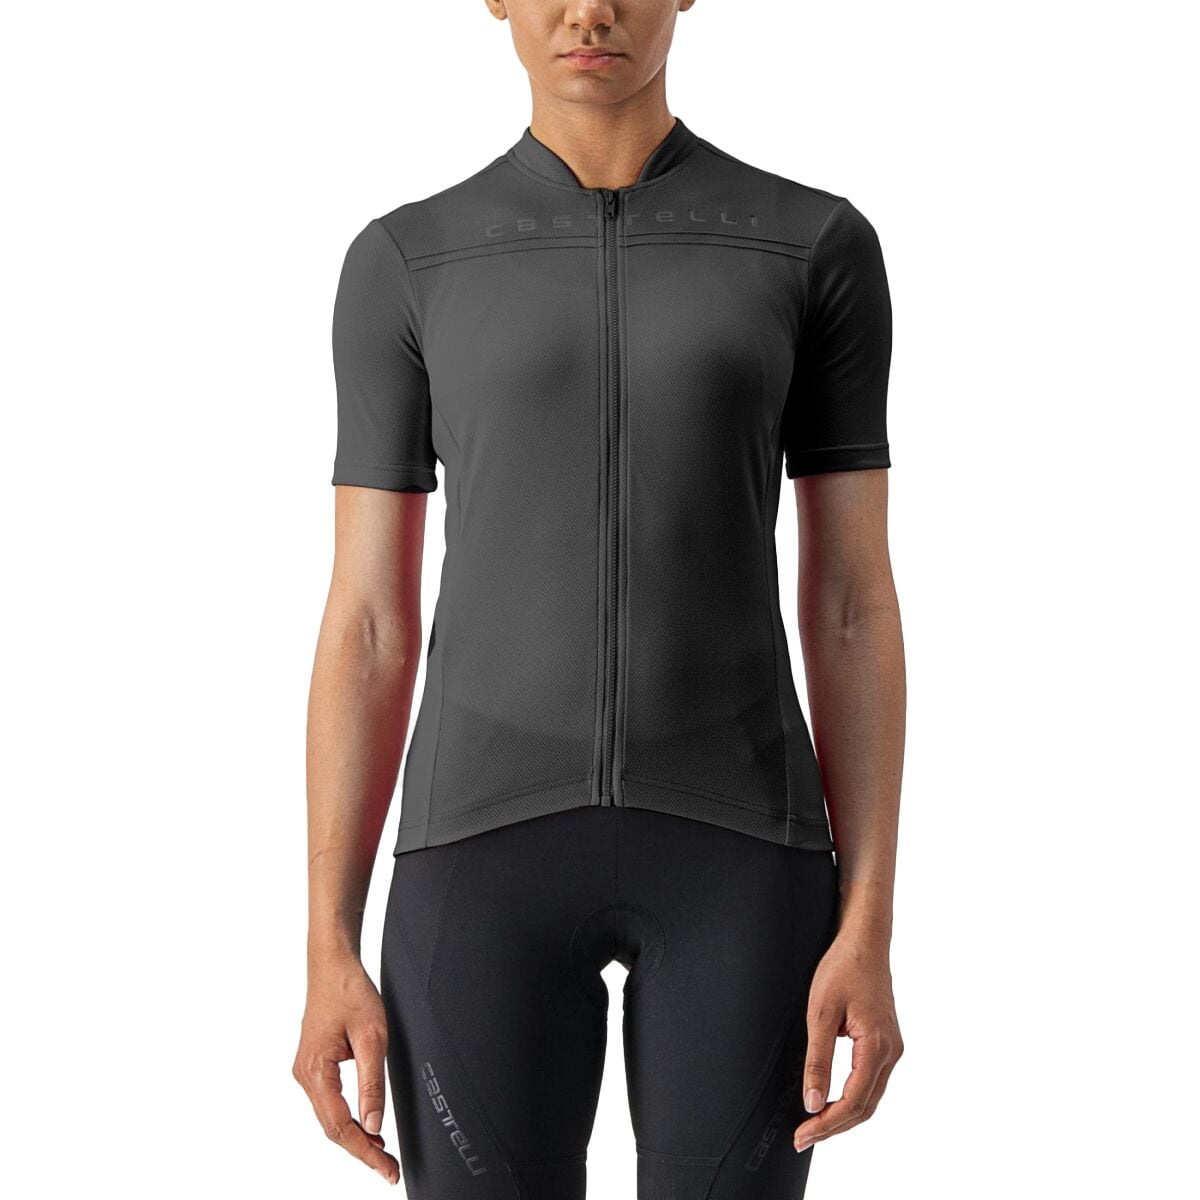 & Road Clothing Cyclist Bike Mountain, Women\'s Triathlon, Apparel Competitive | | Cycling